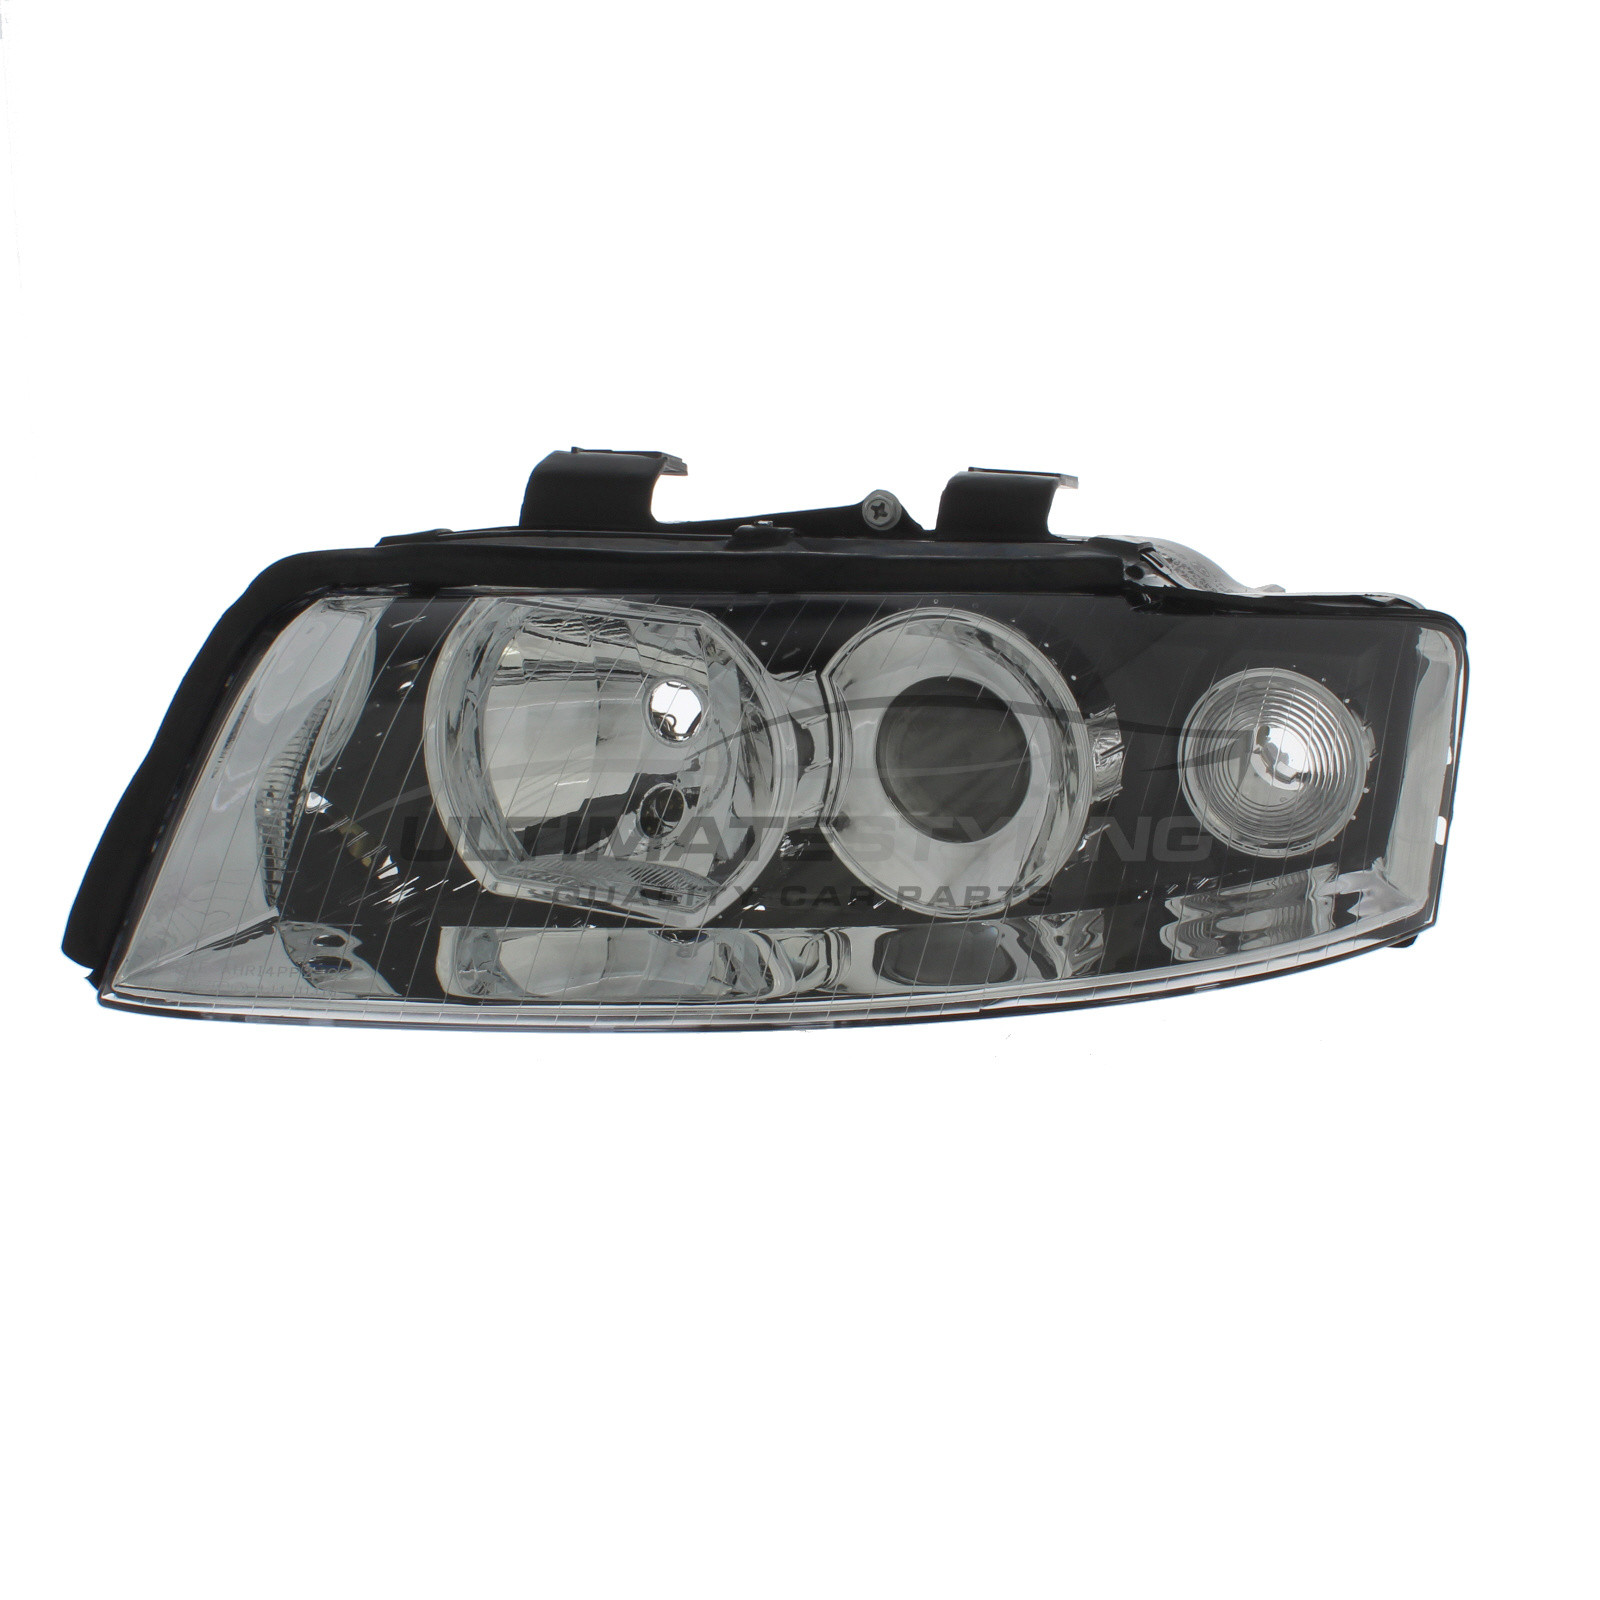 Audi A4 2001-2004 Halogen, Electric Without Motor, Headlight / Headlamp Passengers Side (LH)